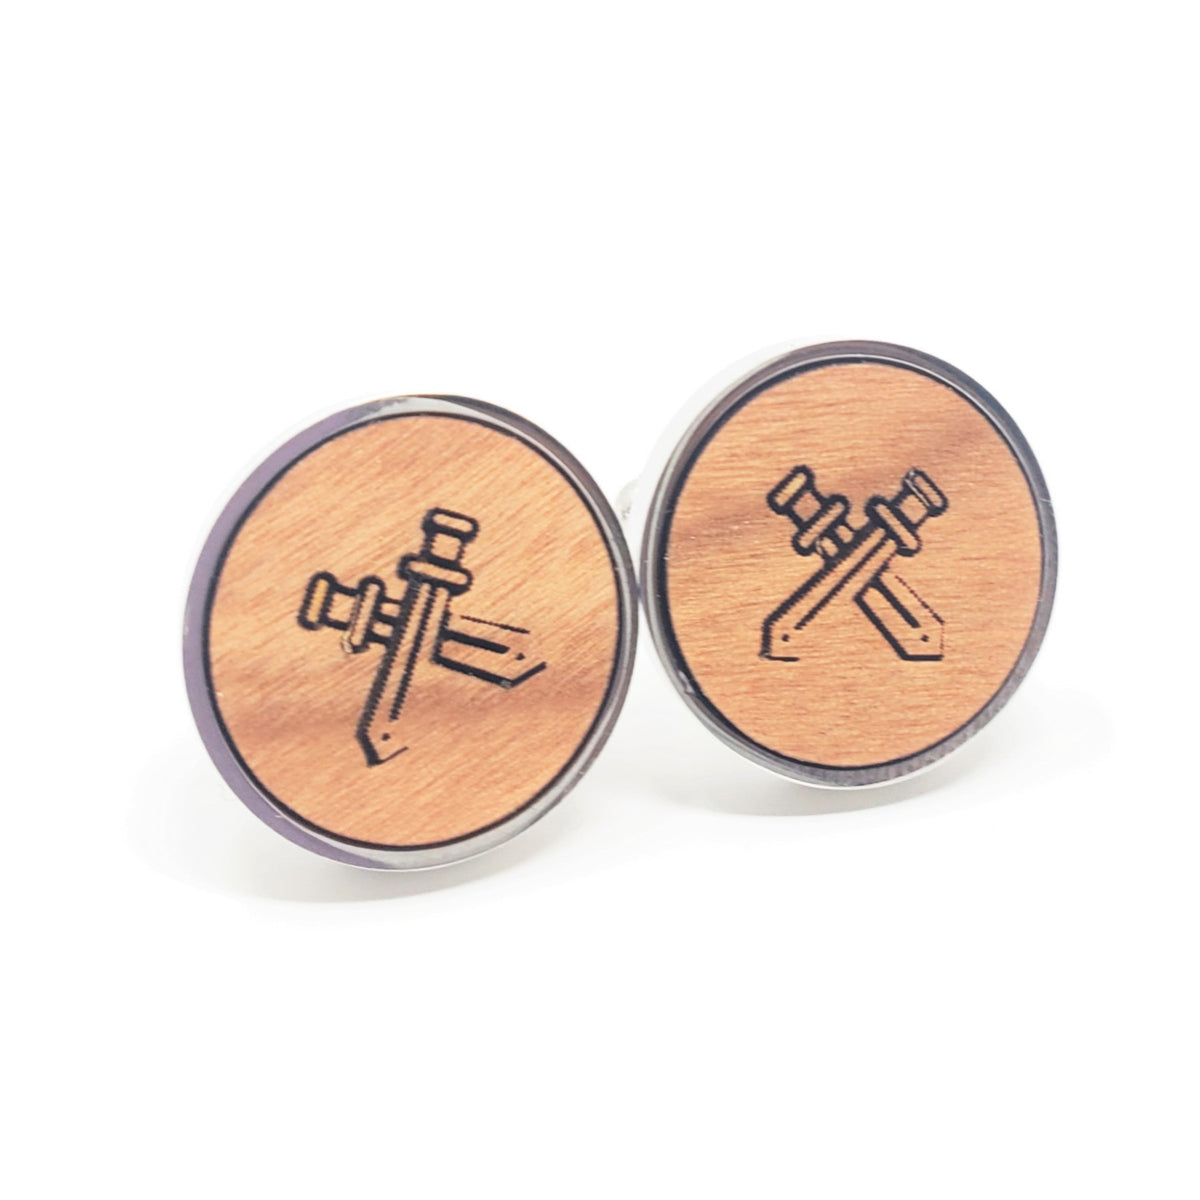 Swords Stainless and Wood Cufflinks